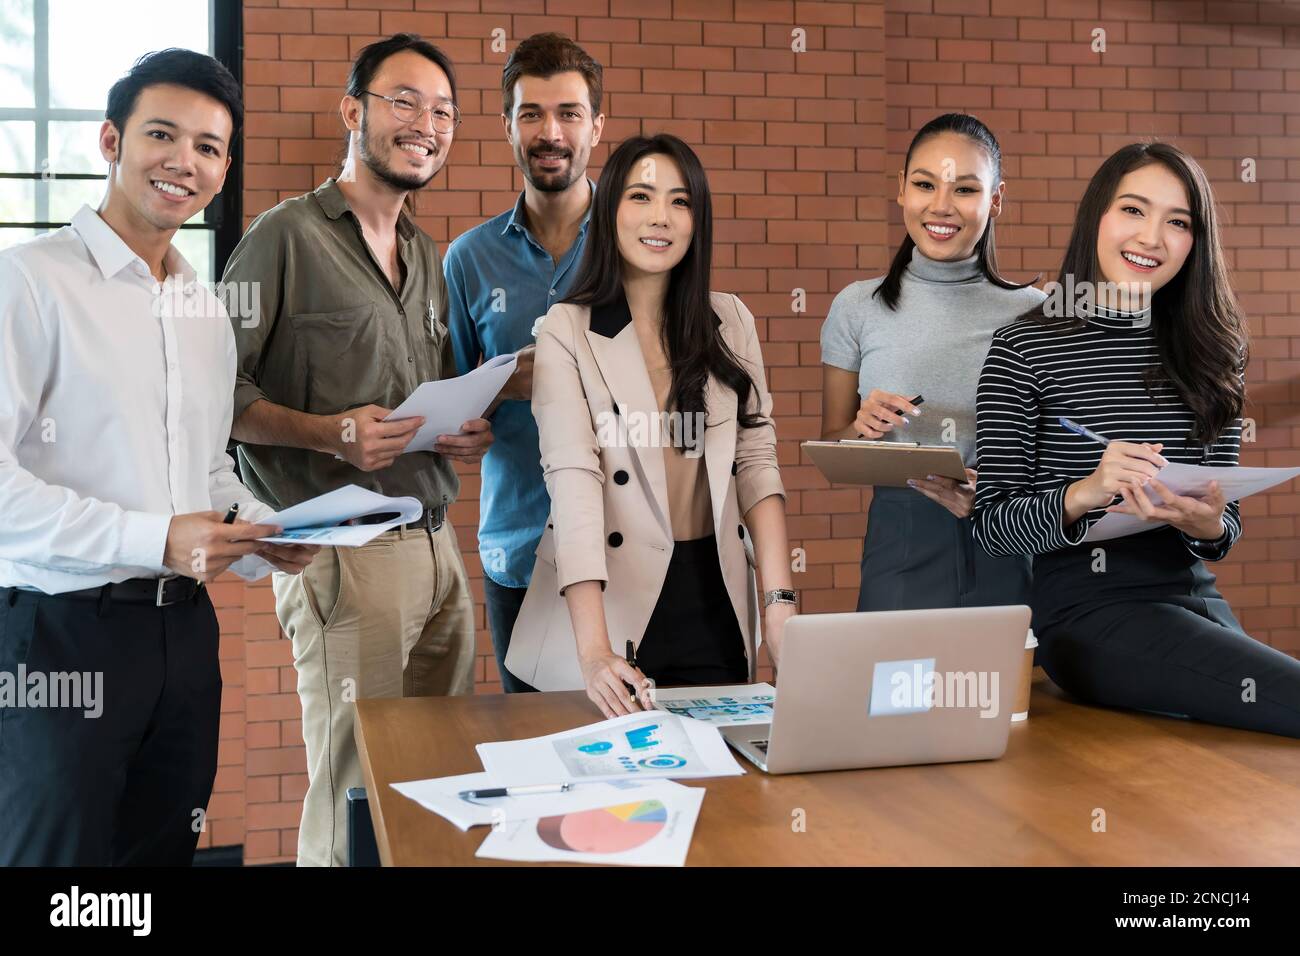 Interracial corporate business teamwork portrait in meeting room. Stock Photo